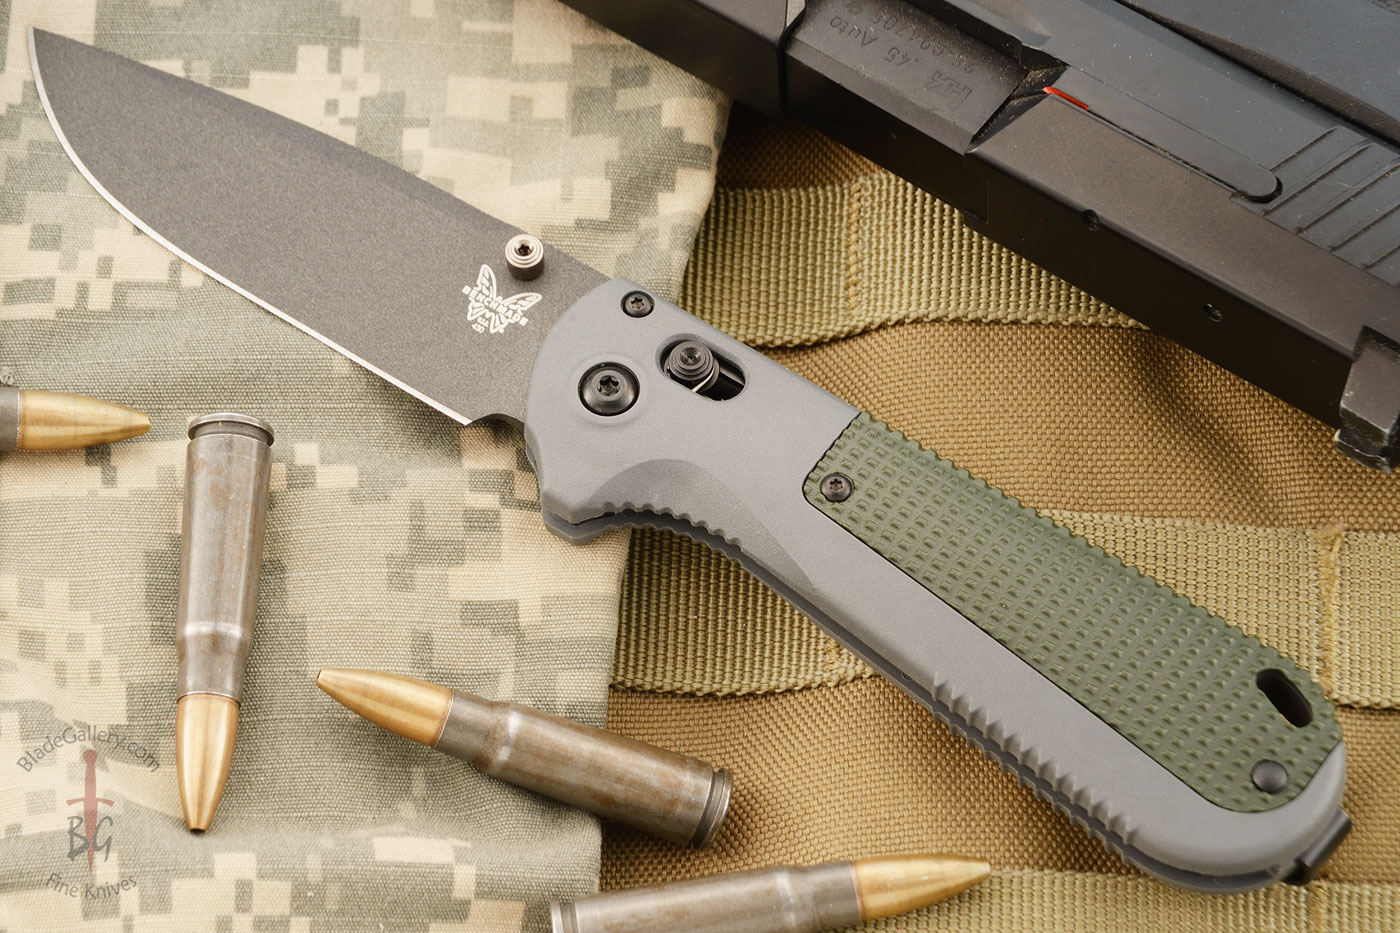 Redoubt AXIS Folder (430BK) - CPM-D2 - First Production